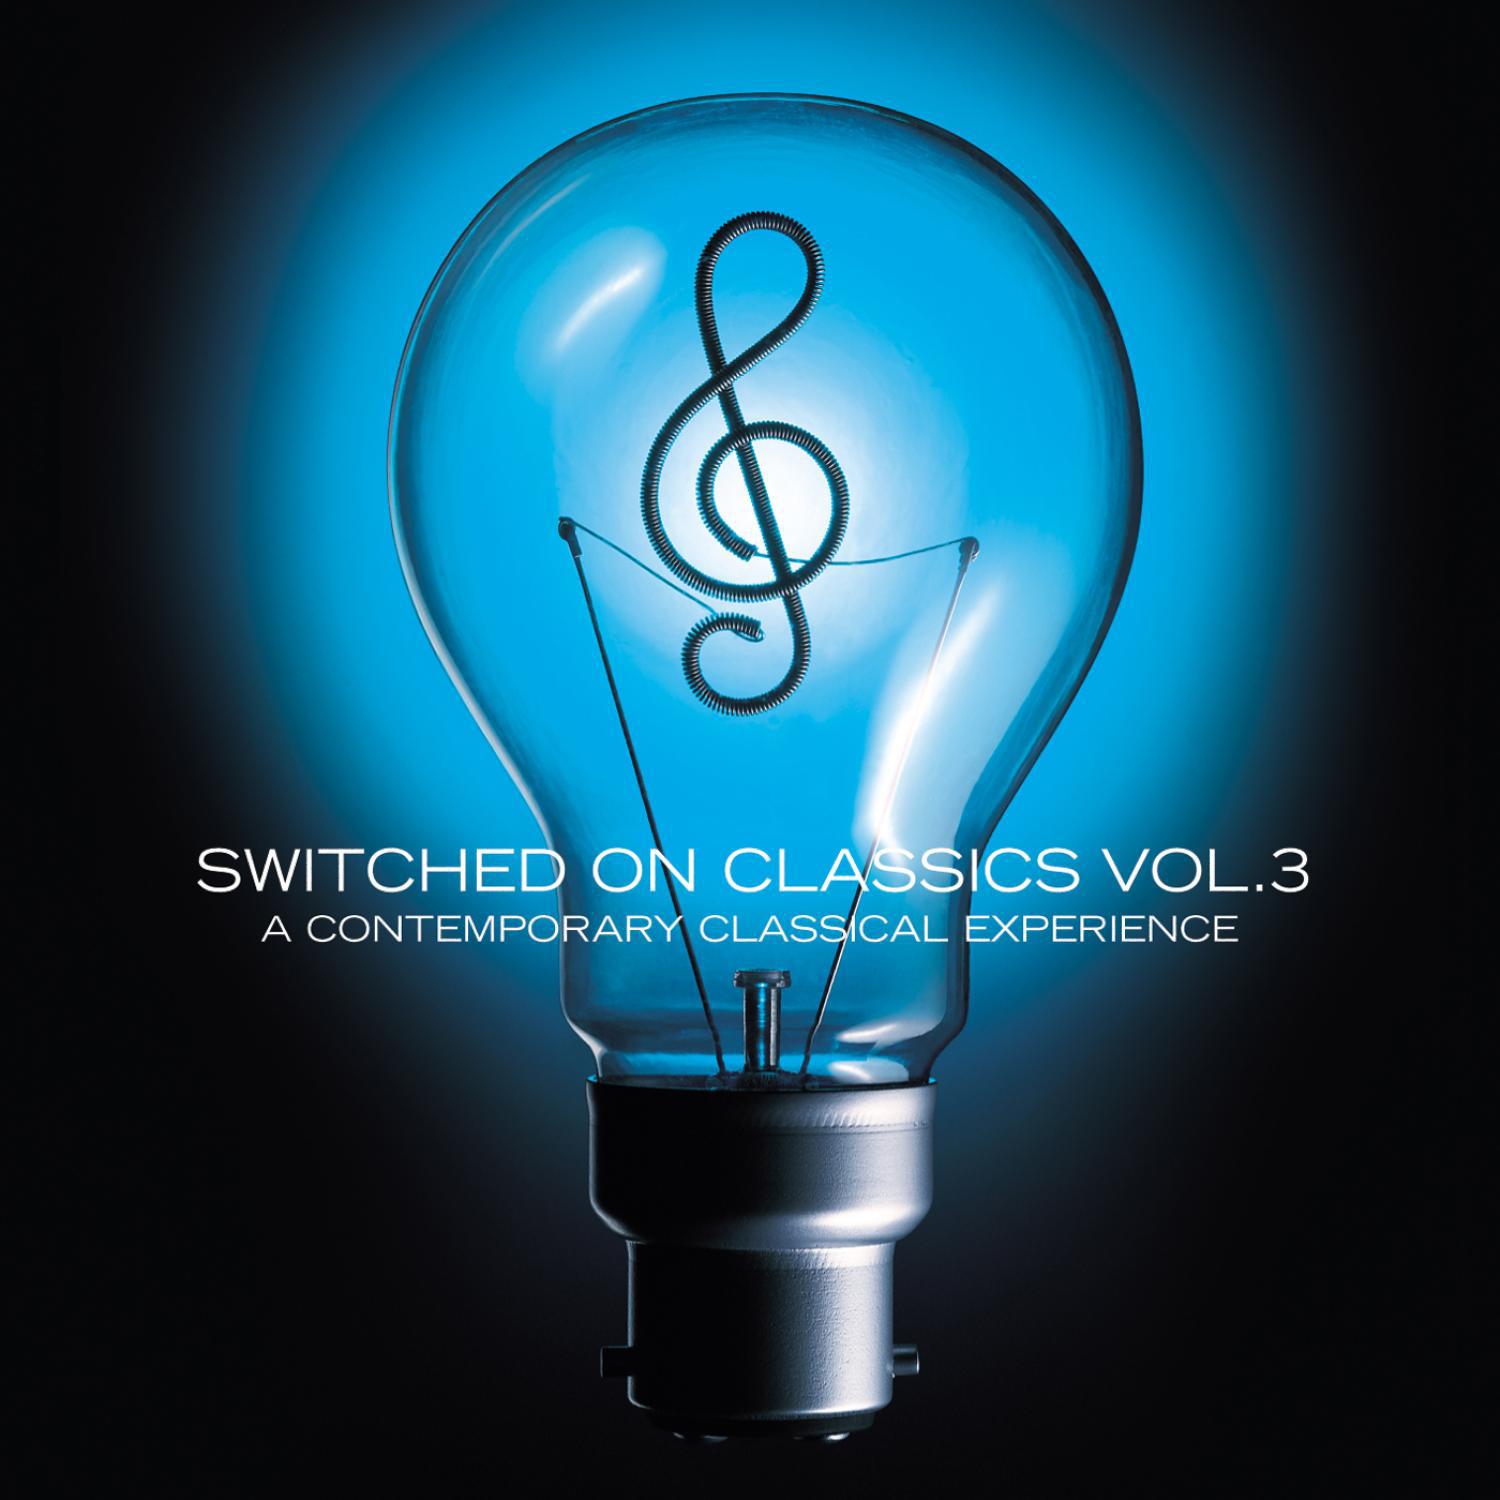 Switched On Classics Vol. 3 - A Contemporary Classical Experience